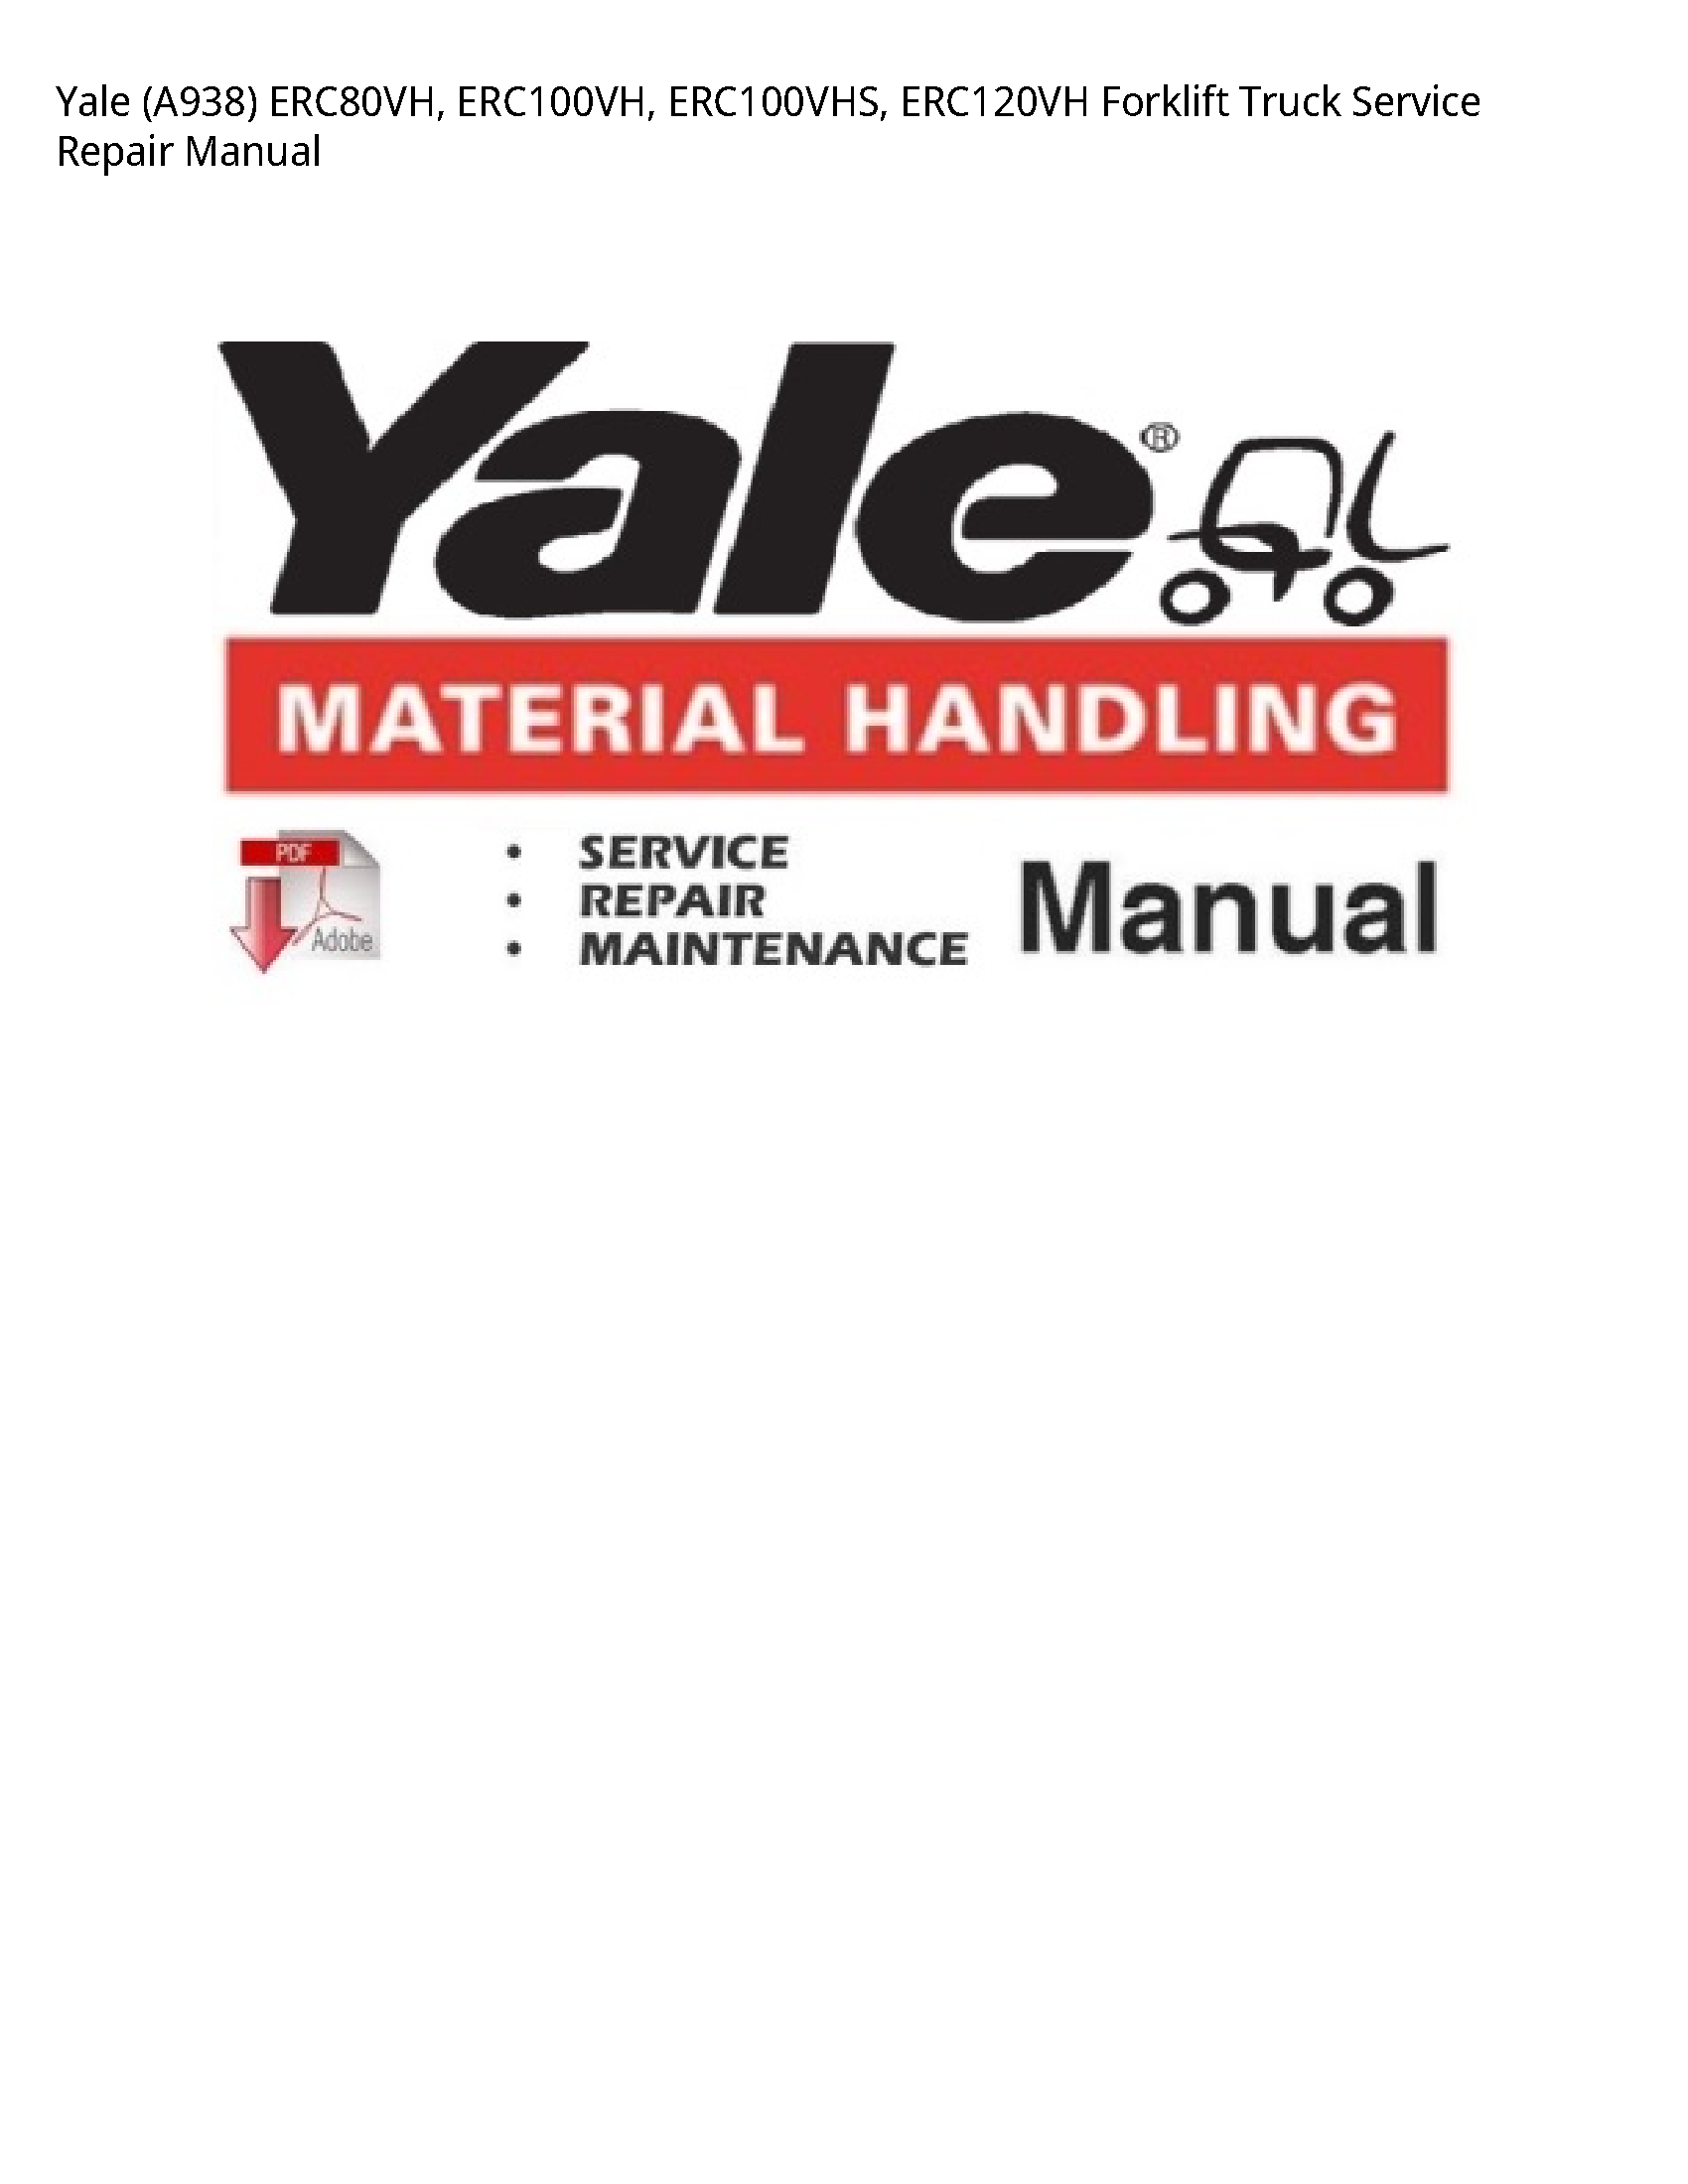 Yale (A938) Forklift Truck manual